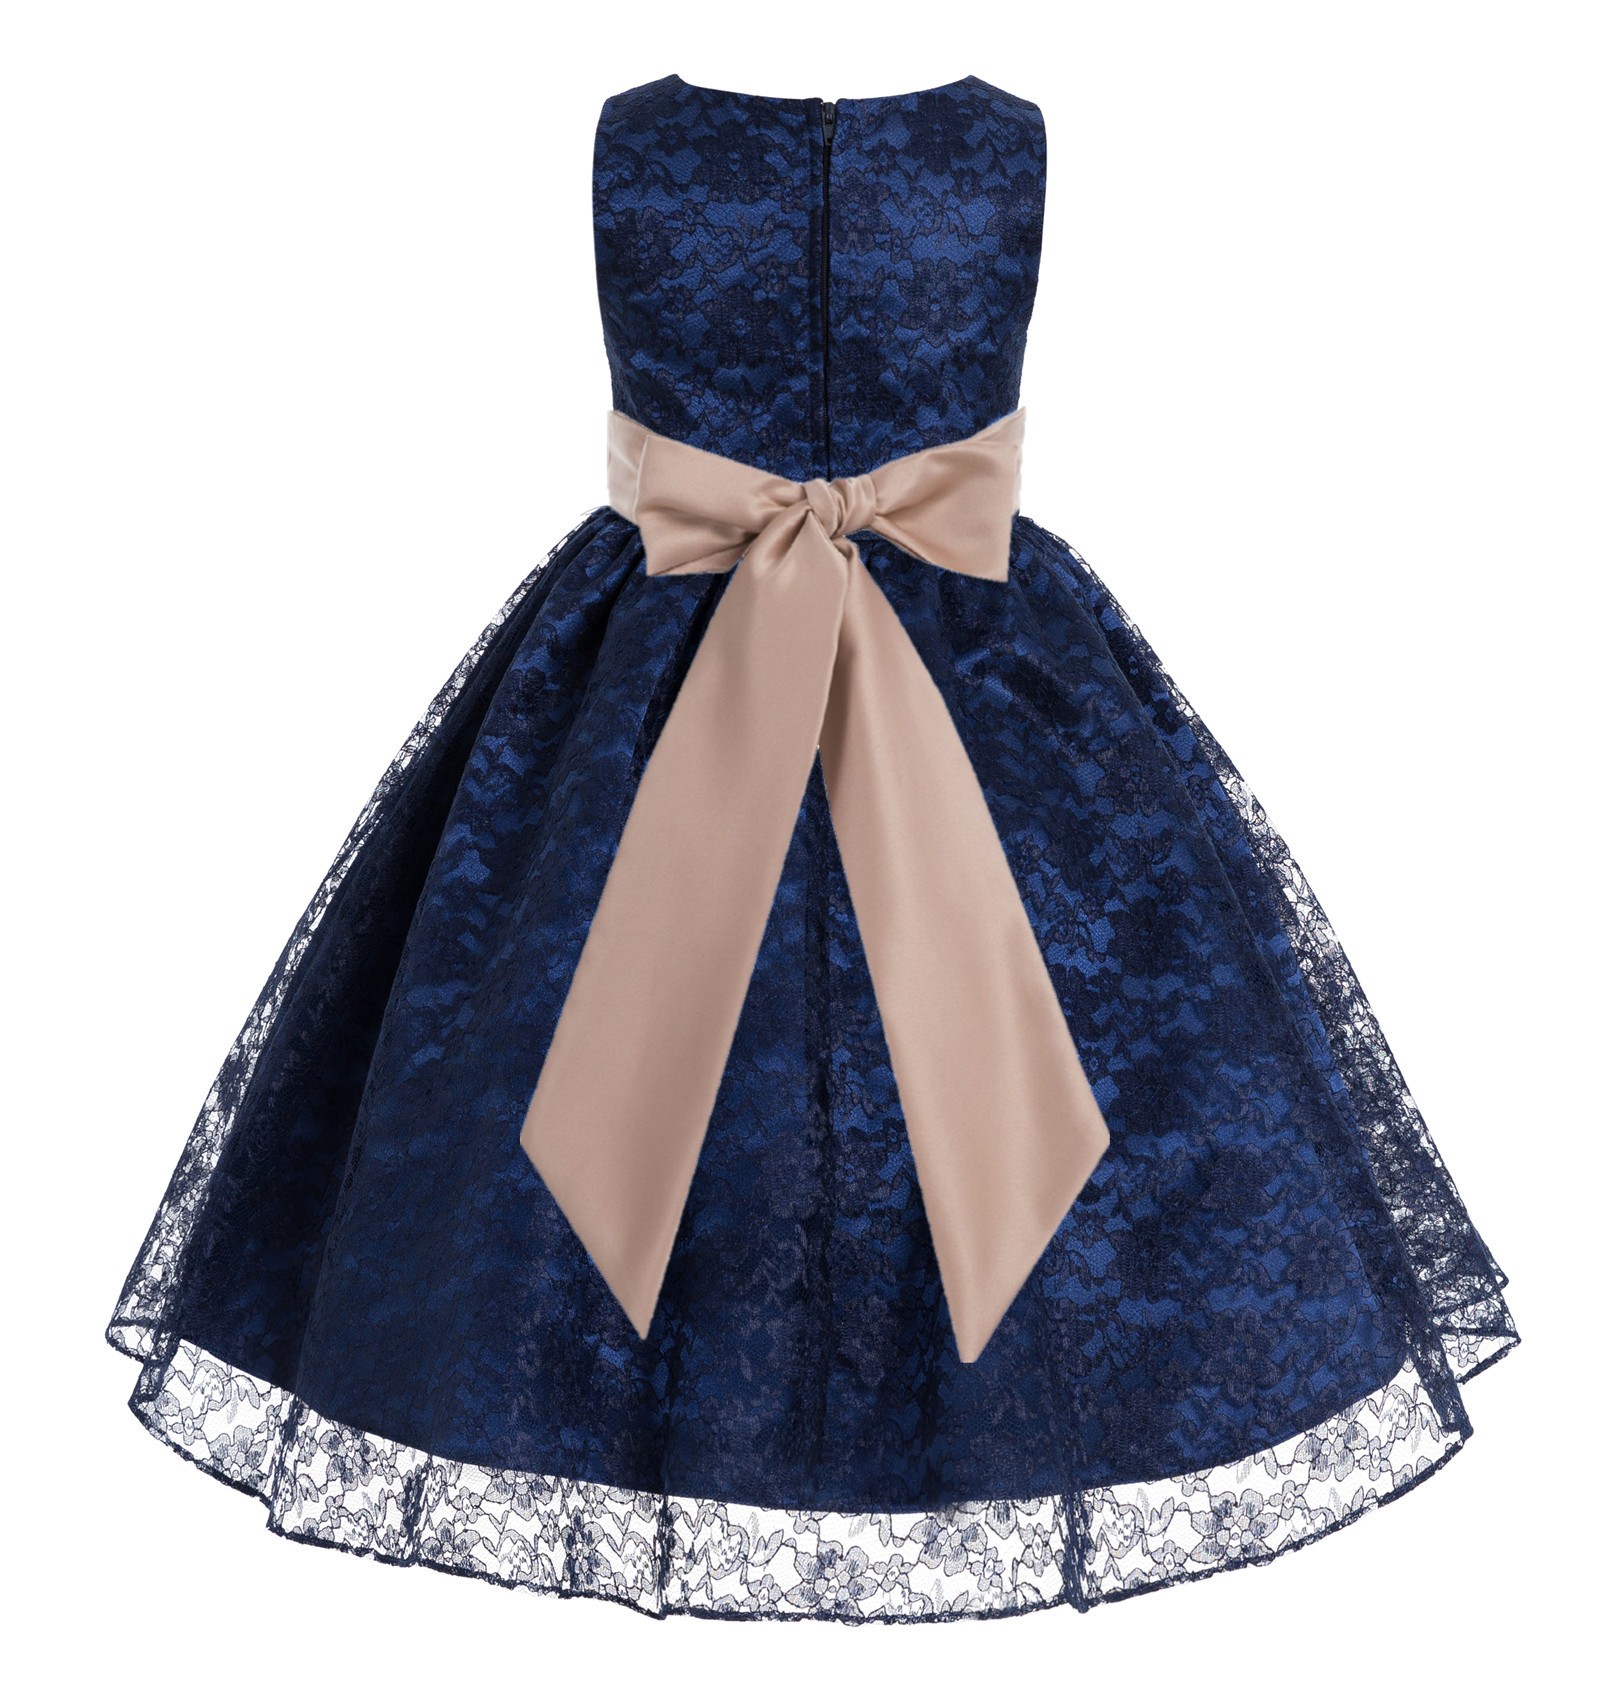 Navy / Rose Gold Floral Lace Overlay Flower Girl Dress Lace Dresses 163s